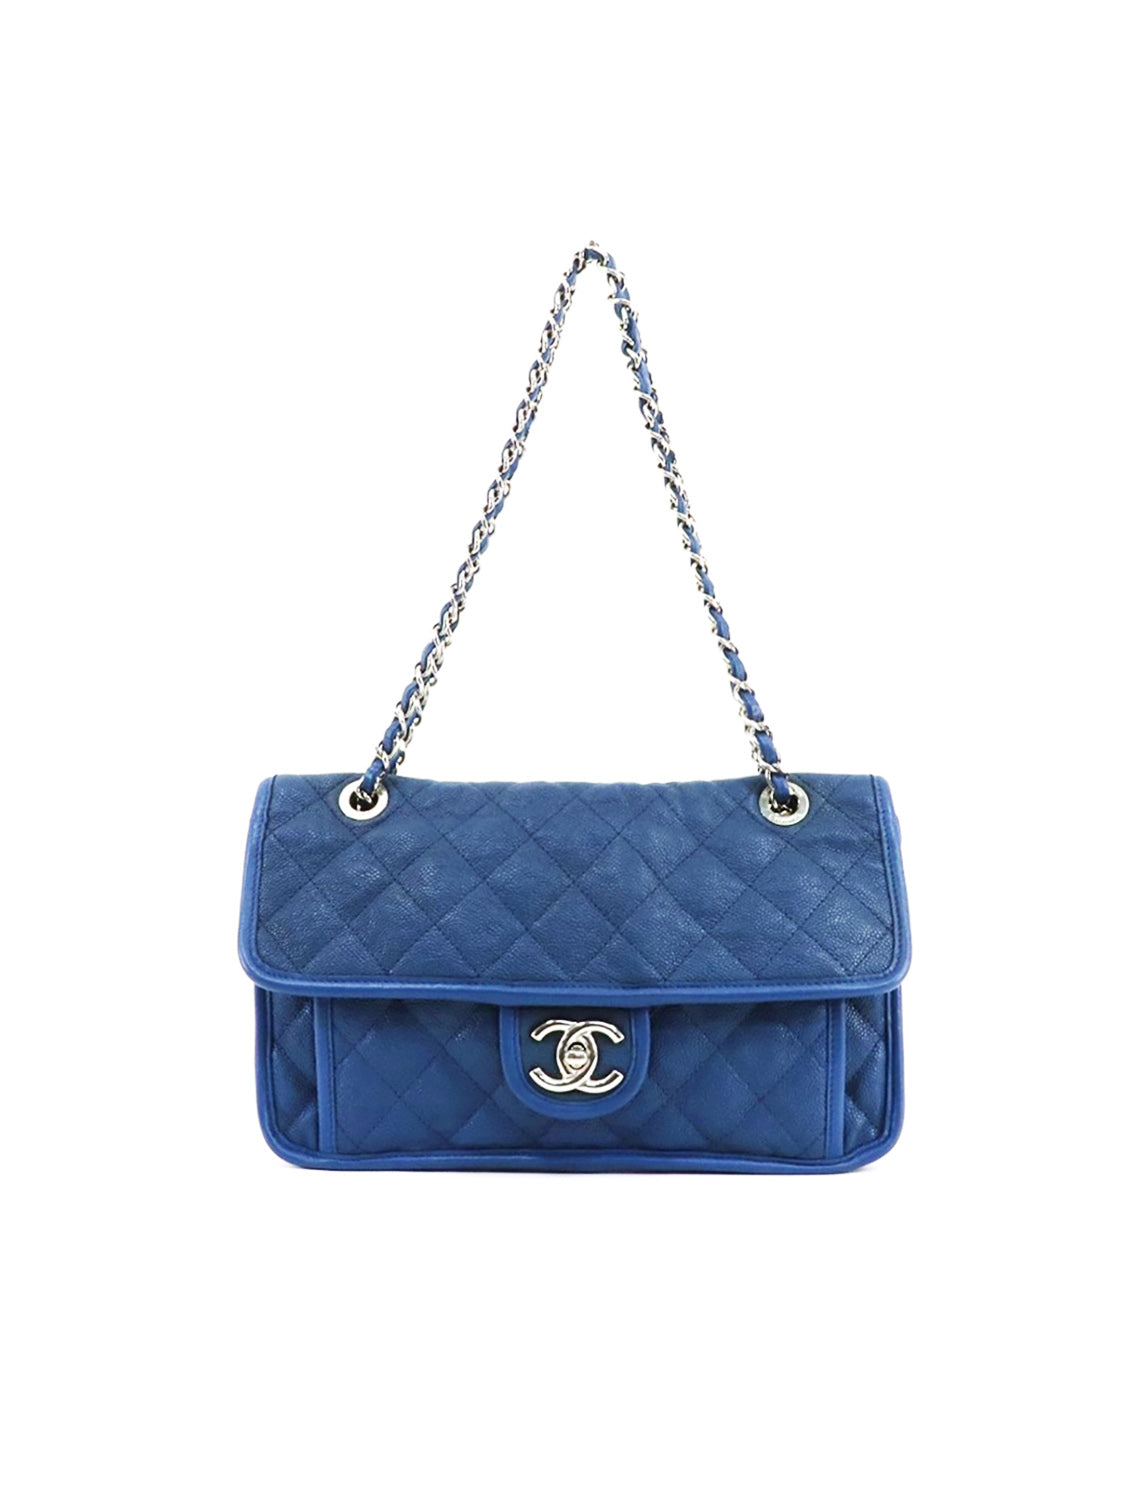 CHANEL Lambskin Soft and Chain Large Flap Blue